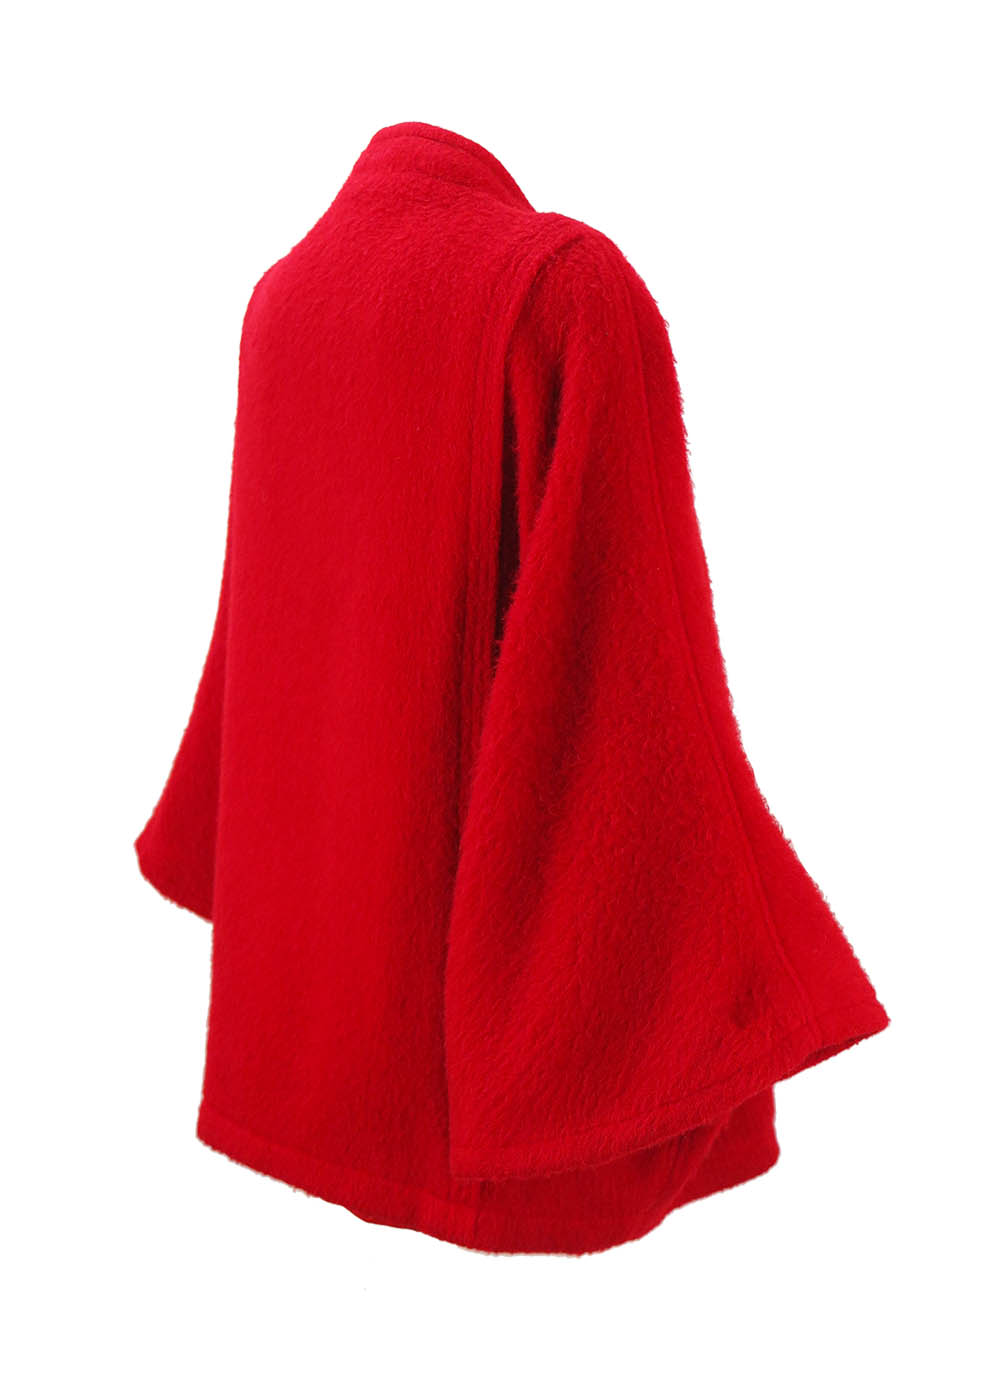 Red Cape with Bell Sleeve Detail - M/L | Reign Vintage